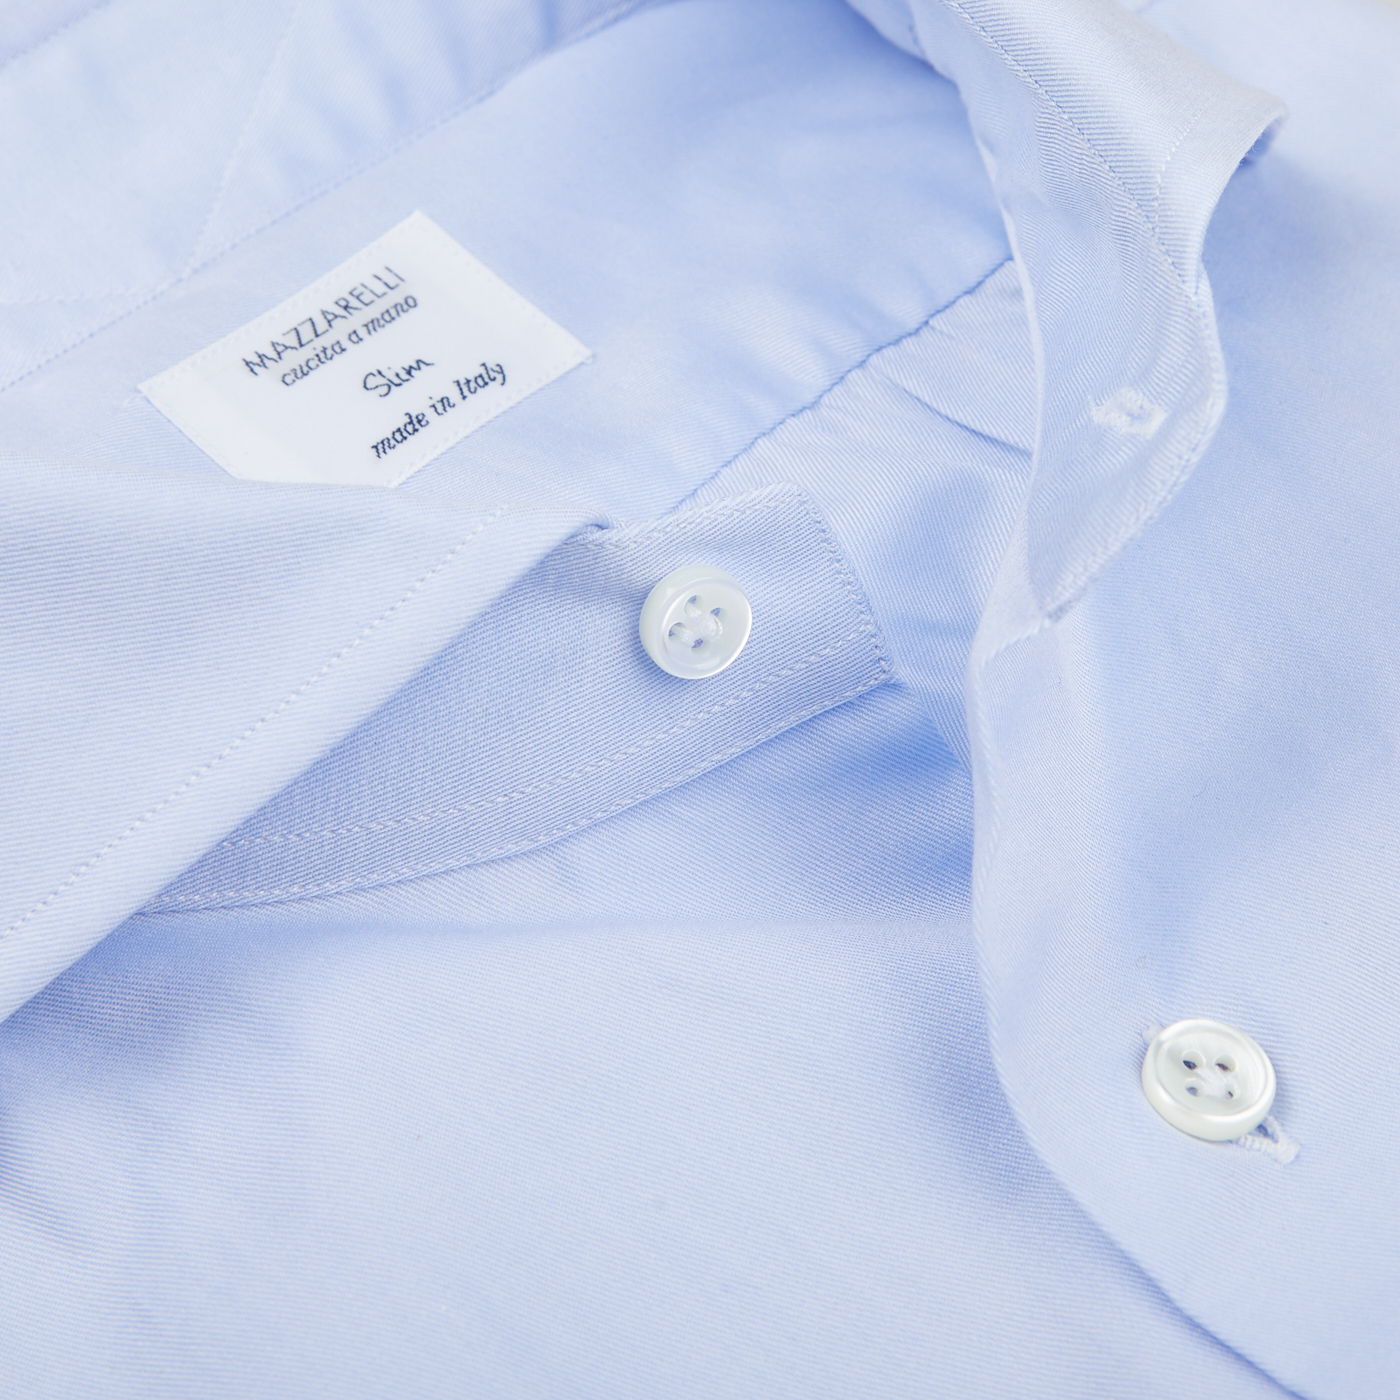 Close-up of a light blue Mazzarelli Light Blue Cotton Twill Cut Away Slim Shirt, focusing on the cutaway spread collar label reading "MAZZARELLI Classic Fit made in Italy" and two white buttons.